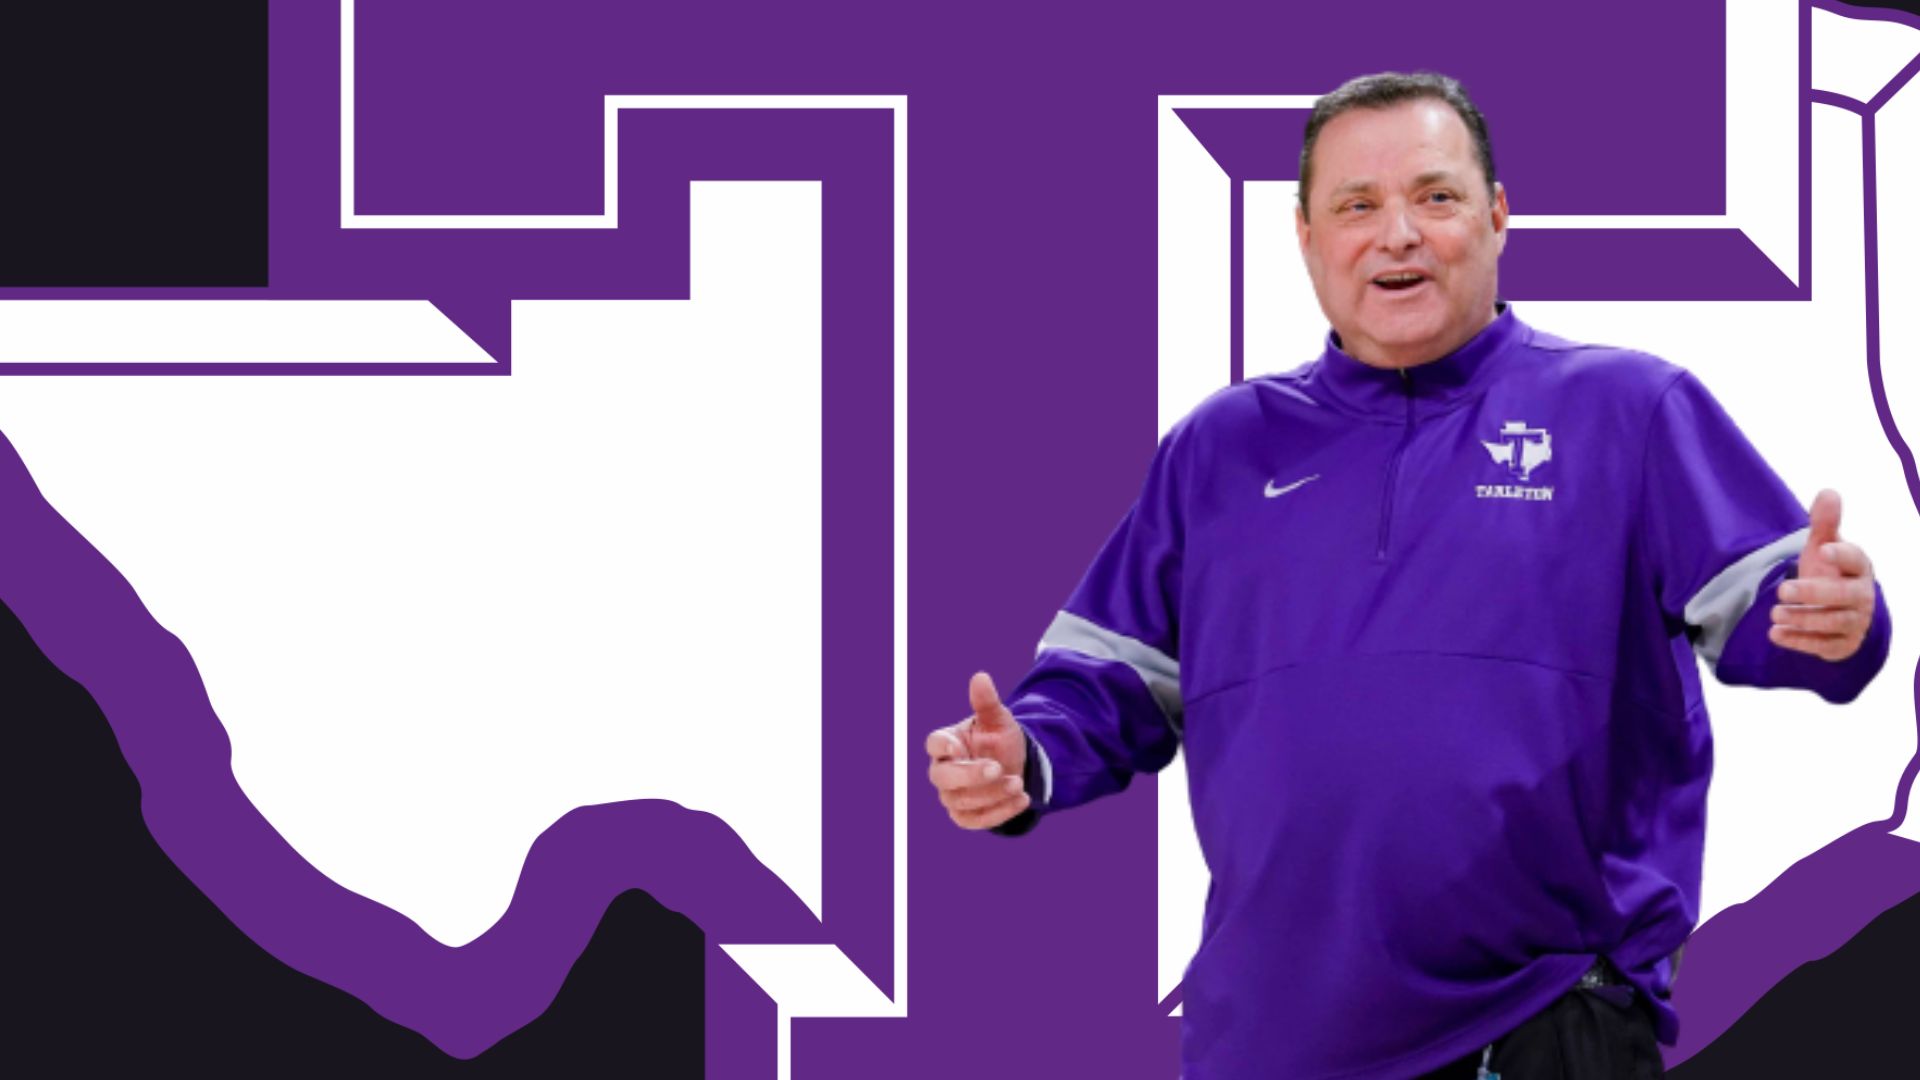 Tarleton’s Billy Gillispie steps away from team temporarily due to “medical circumstances”